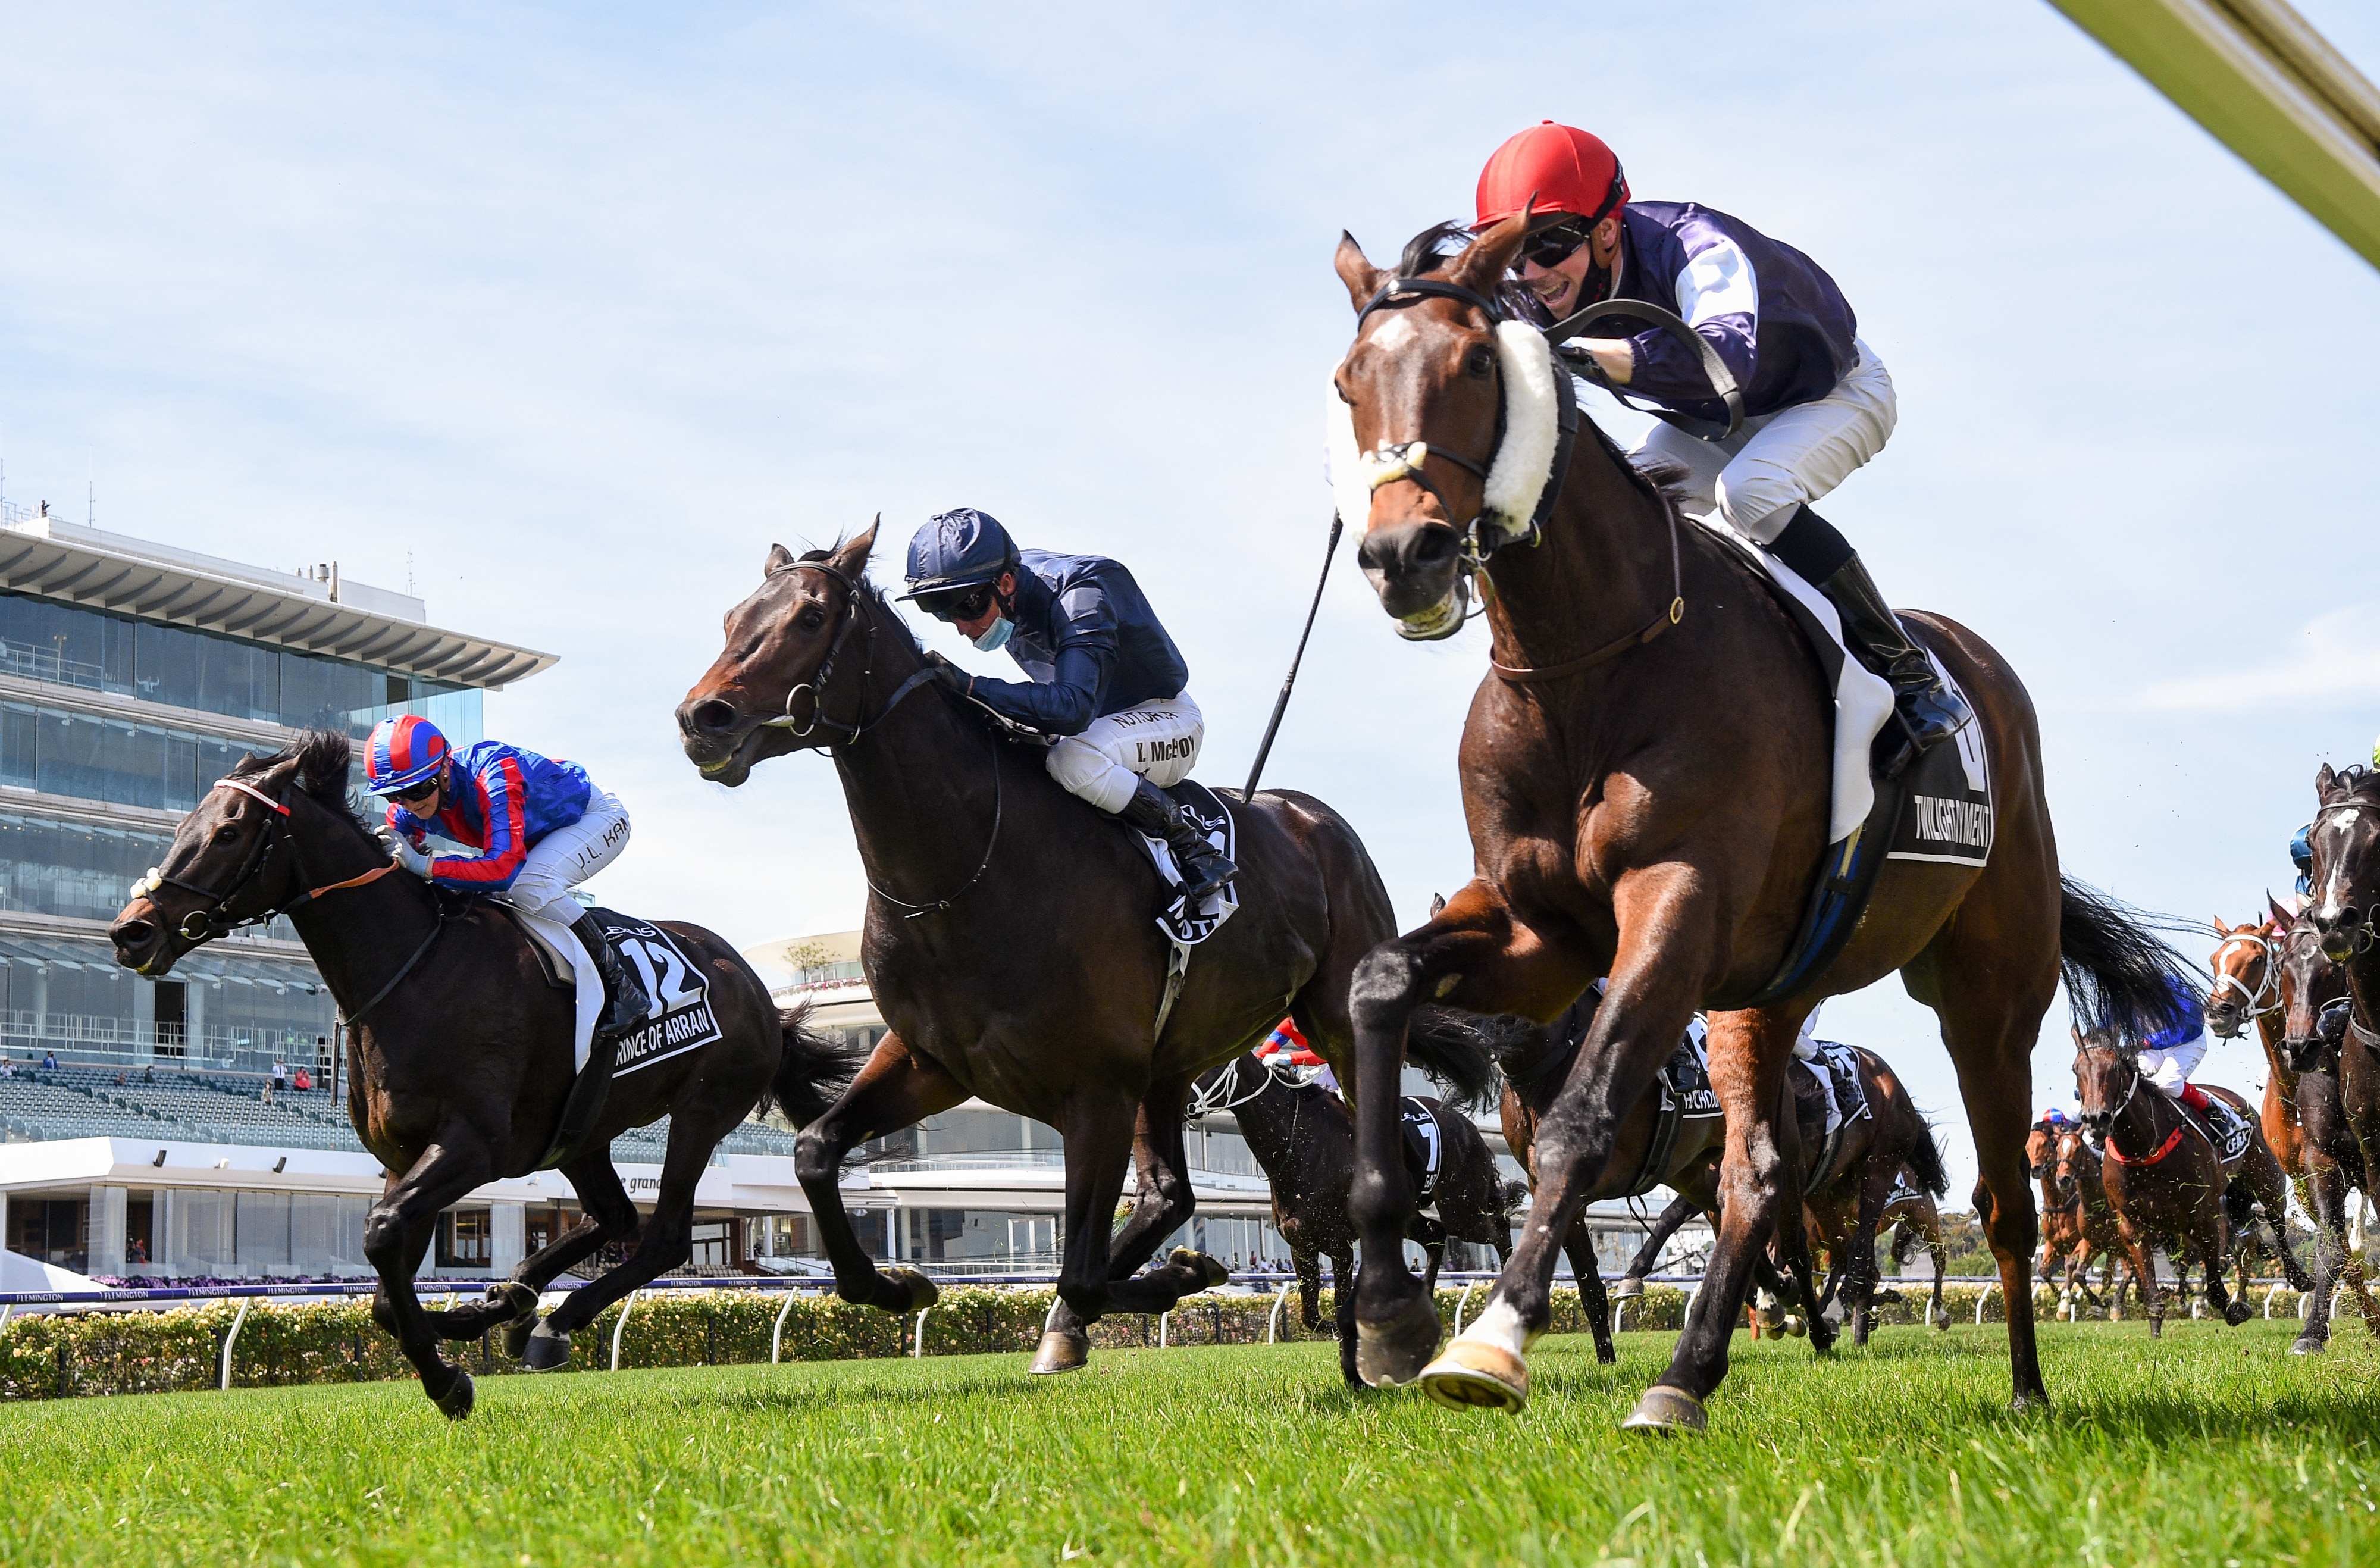 Melbourne Cup Day at Flemington Racecourse in Melbourne, Tuesday 3 November 2020. (AAP Image / Racing Photos, Pat Scala) NO FILING, EDITORIAL ONLY